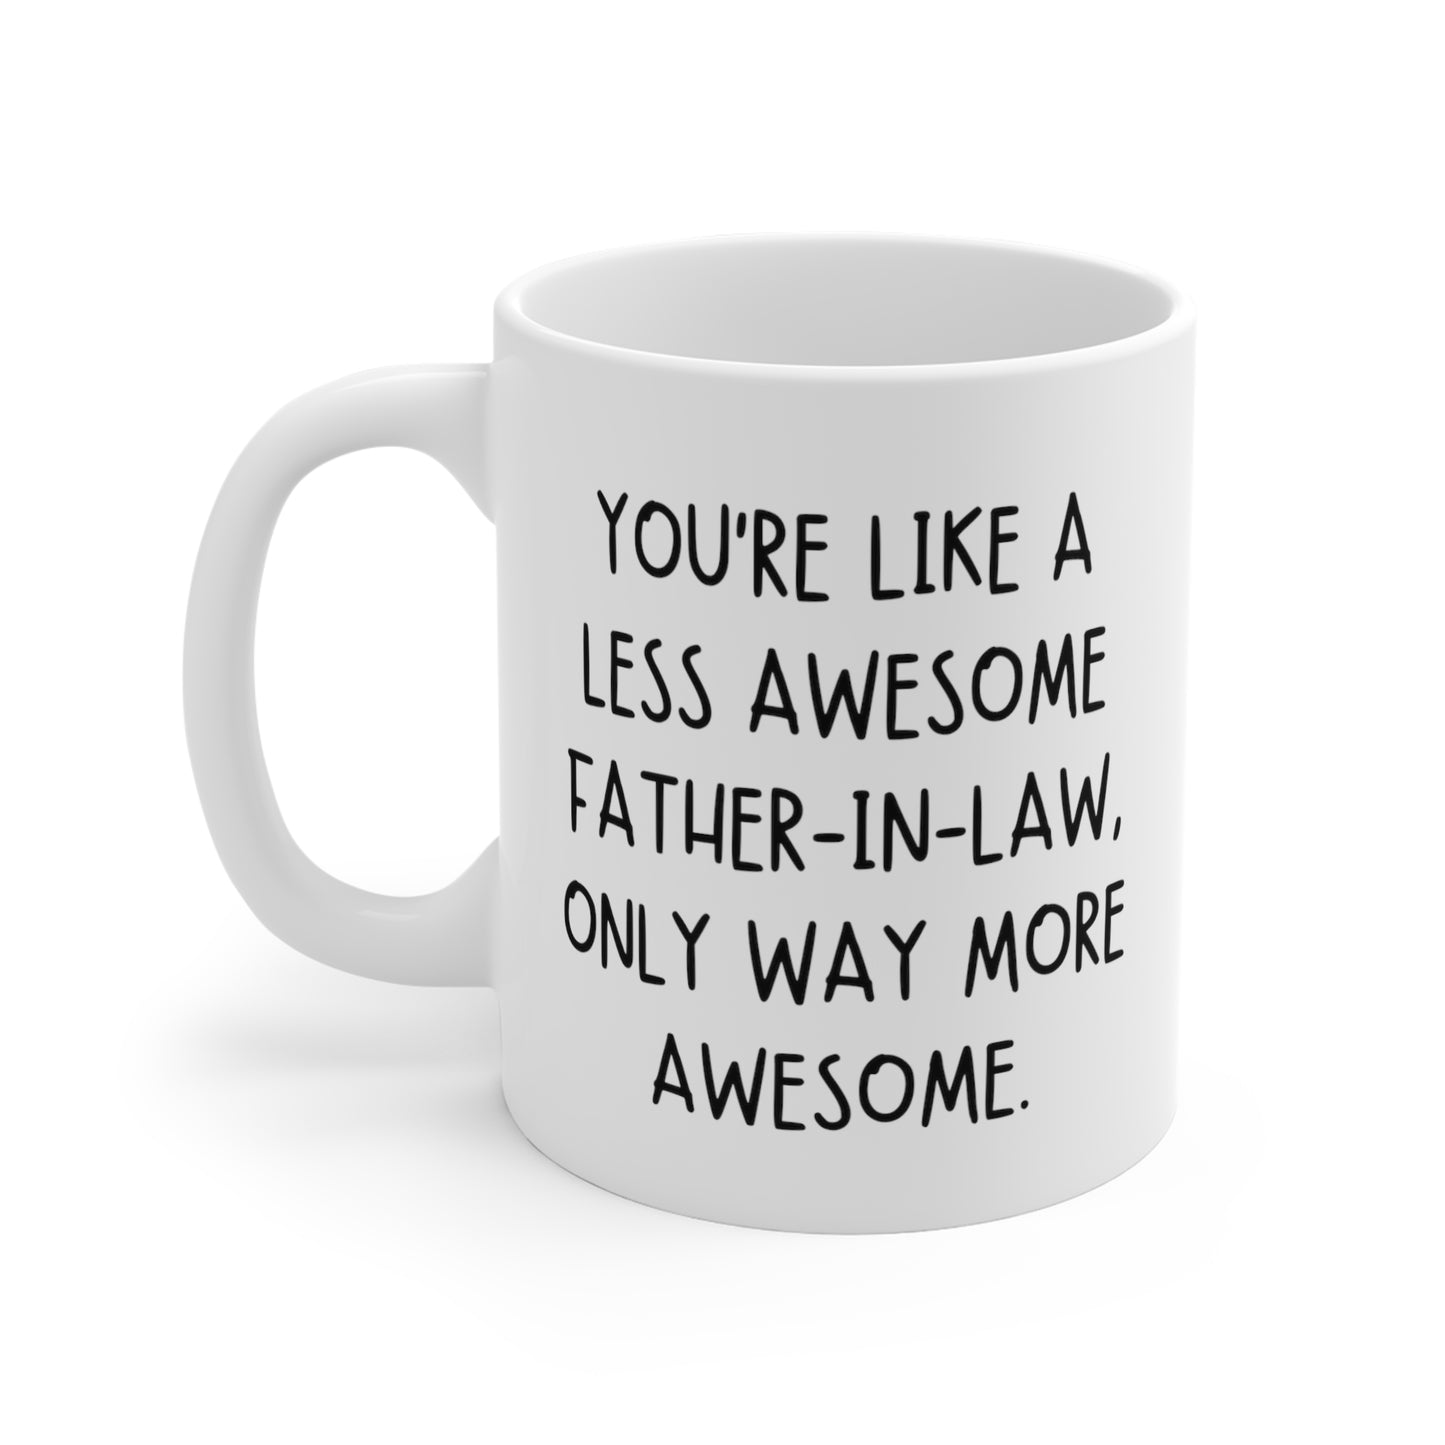 You're Like A Less Awesome Father-In-Law, Only Way More Awesome | Funny, Snarky Gift | White Ceramic Mug, Fun Block Font